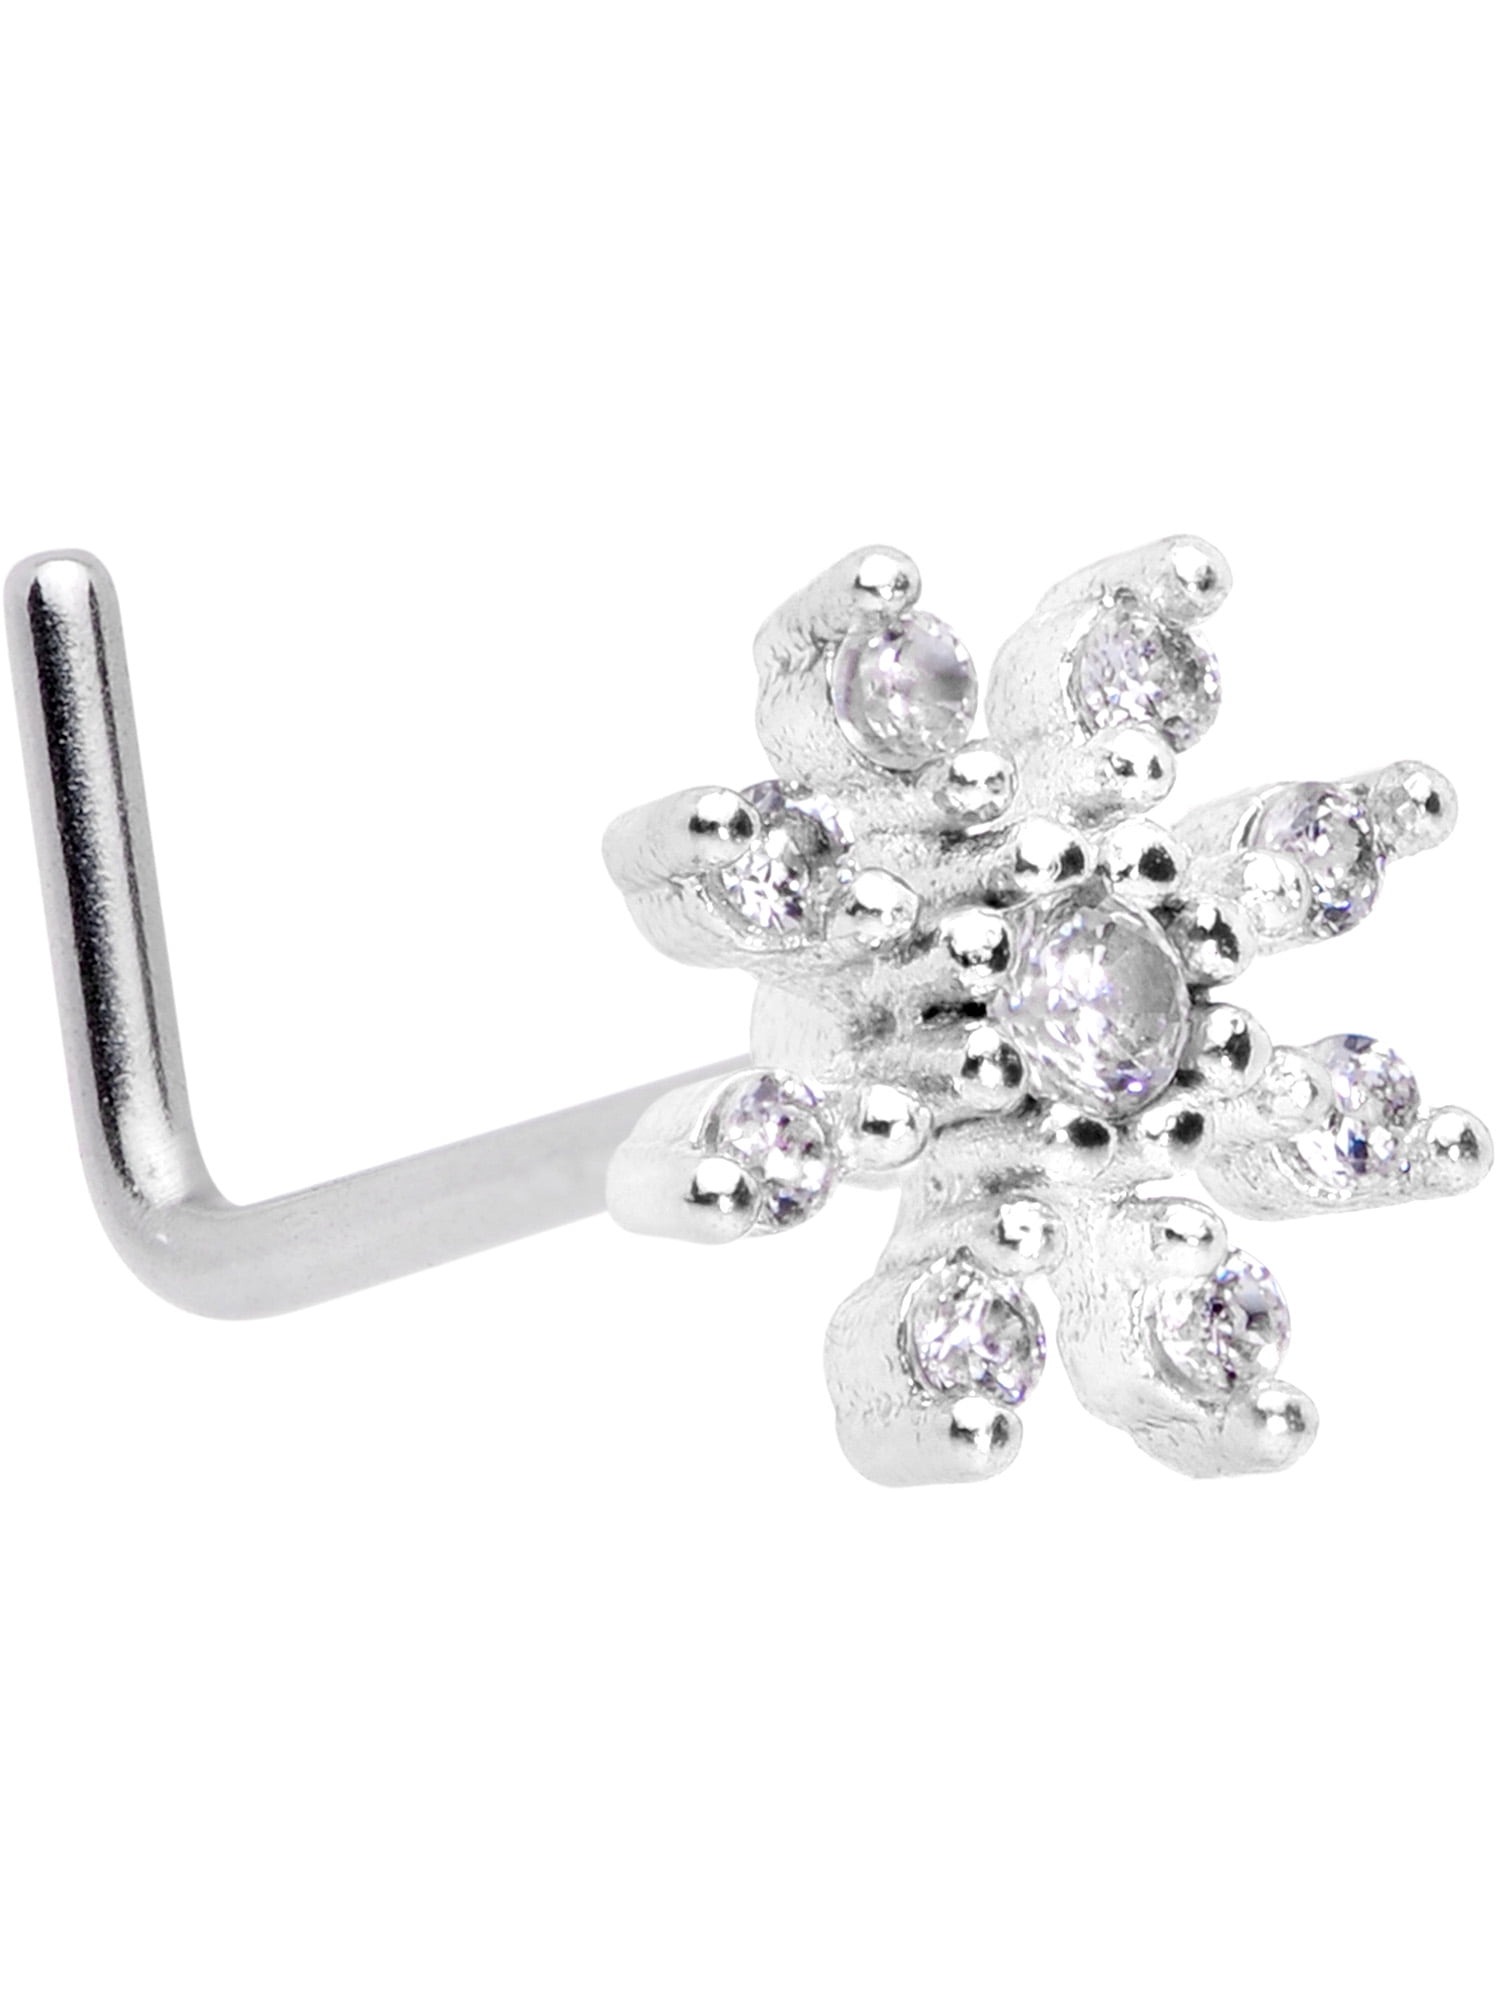 Body Candy 20G Steel L Shaped Nose Ring Clear Accent Flower Nose Stud